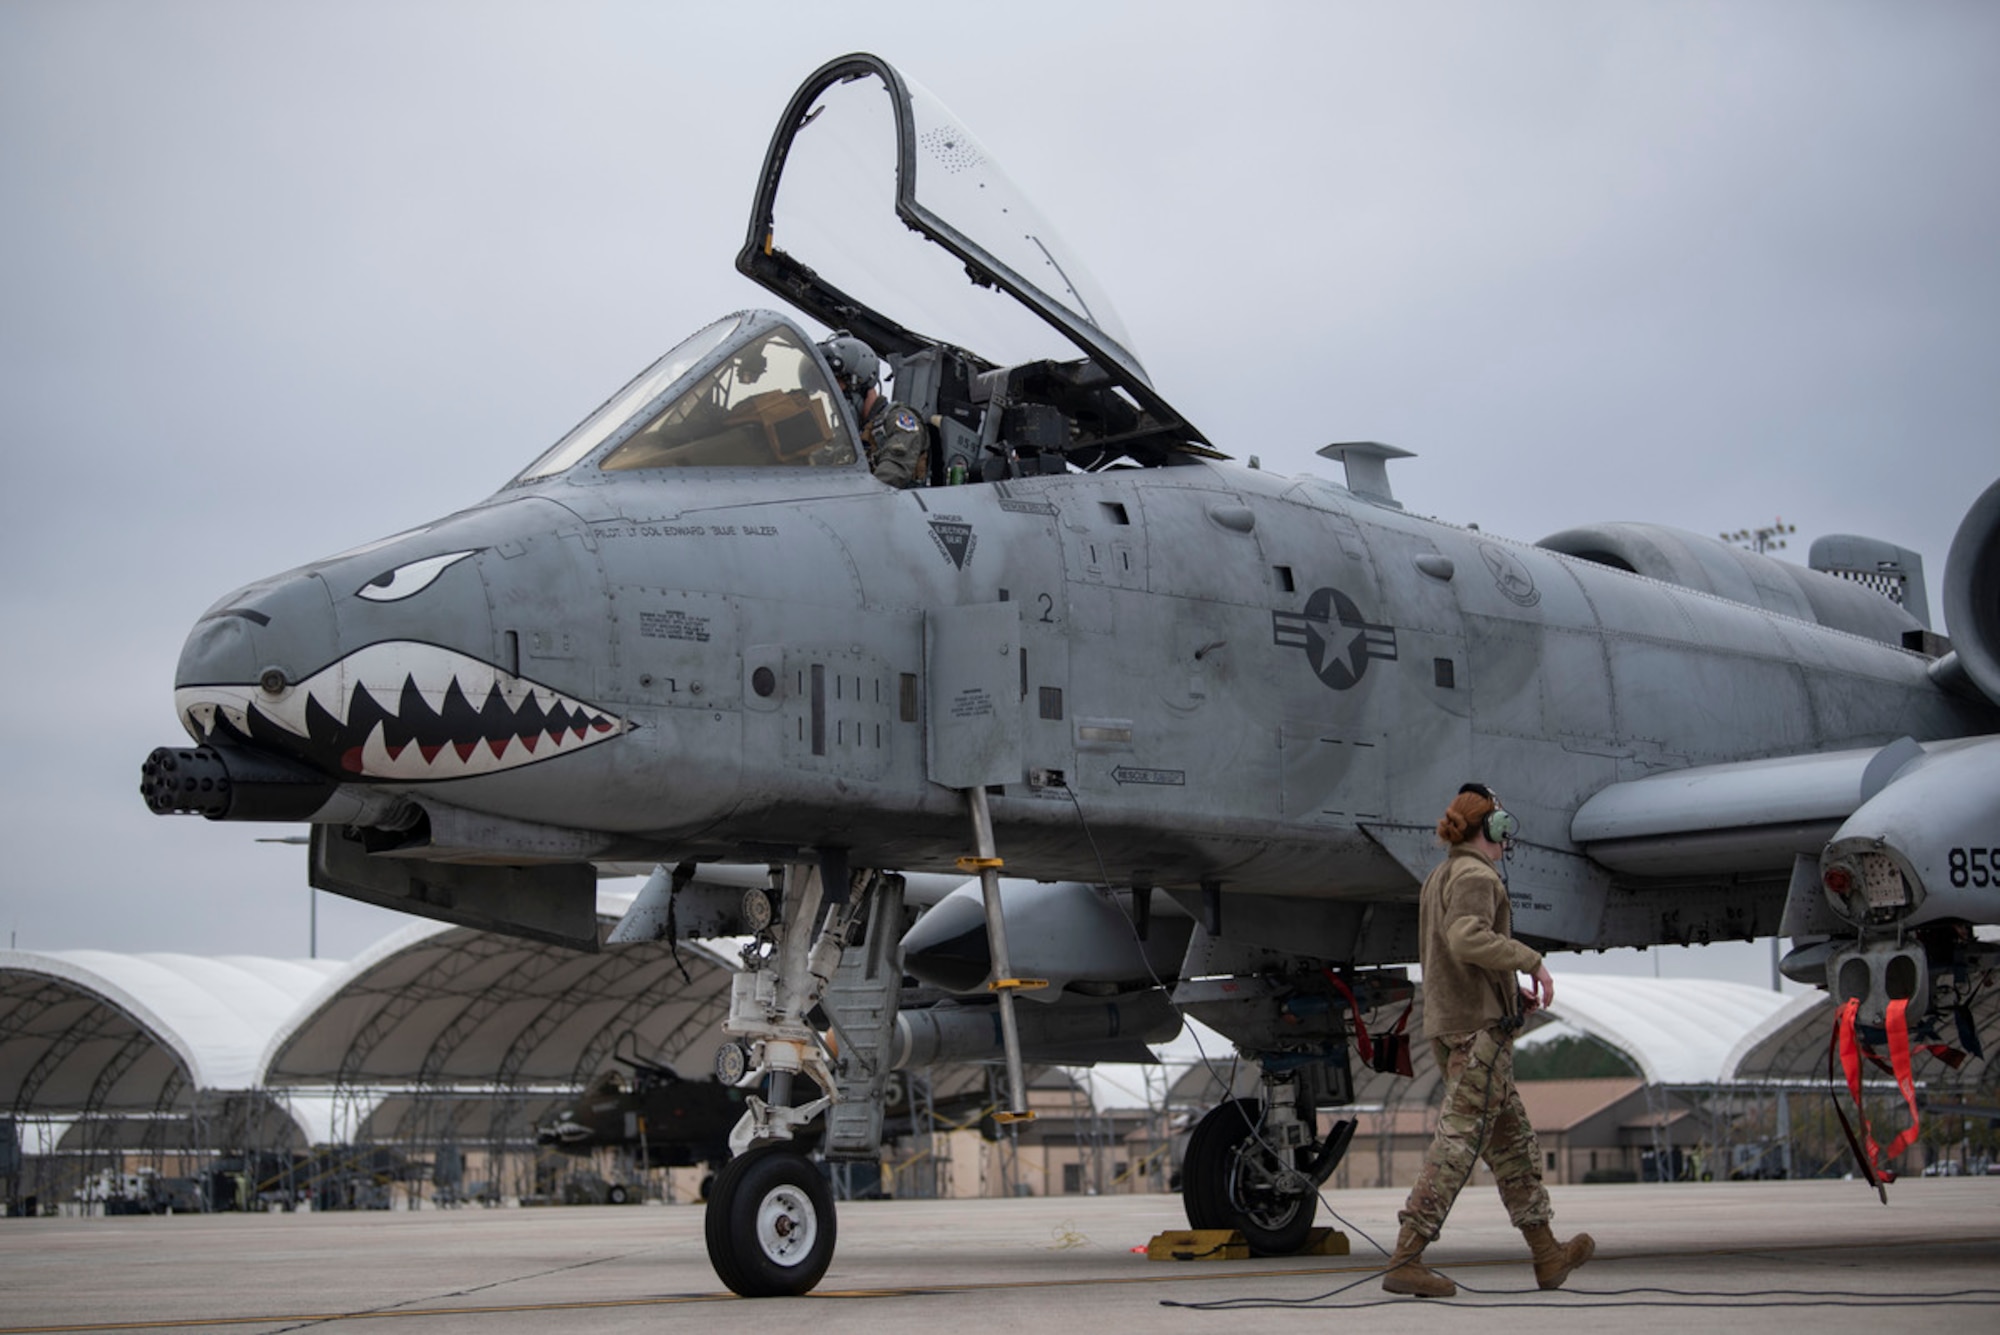 An A-10C Thunderbolt II undergoes a pre-flight check prior to takeoff during Mosaic Tiger 24-1 at Moody Air Force Base, Georgia, November 13, 2023. During Mosaic Tiger 24-1, Airmen from Moody practiced rapidly employing air assets in contested and dispersed locations. (U.S. Air Force photo by Staff Sgt. Thomas Johns)